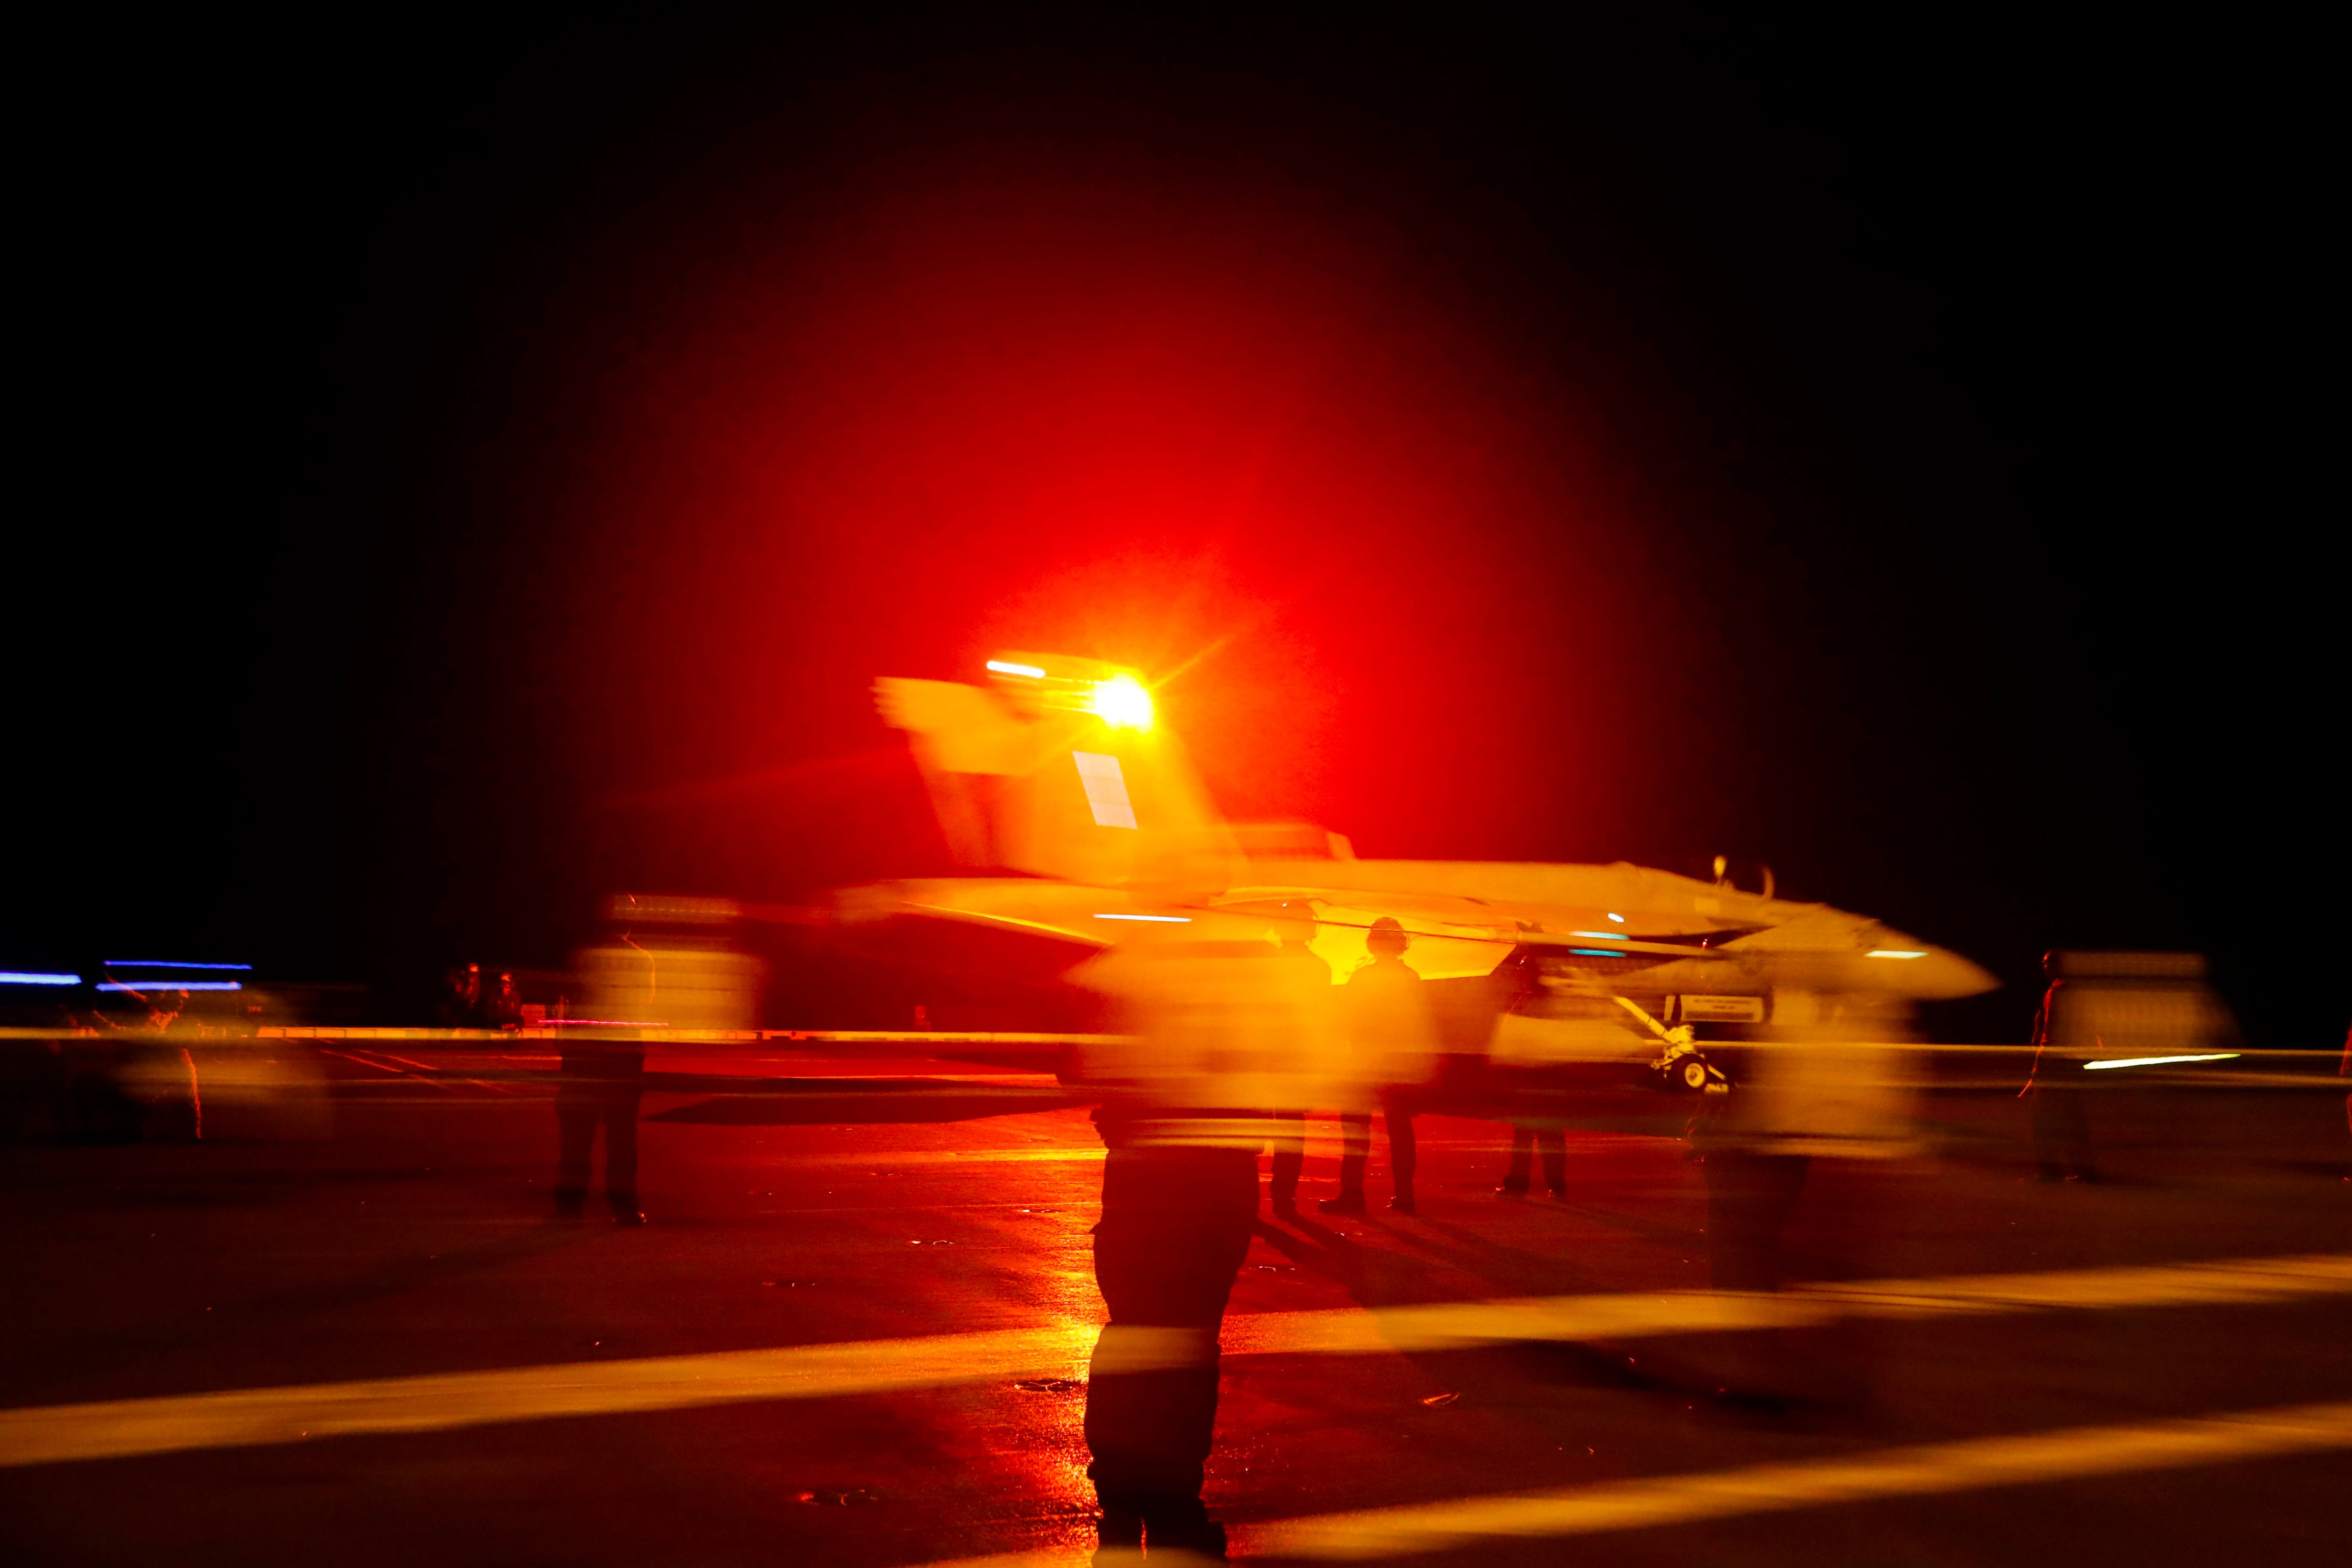 An F/A-18E Super Hornet aircraft launches from the flight deck the Nimitz-class aircraft carrier USS Abraham Lincoln in the Persian Gulf on May 10, 2019.